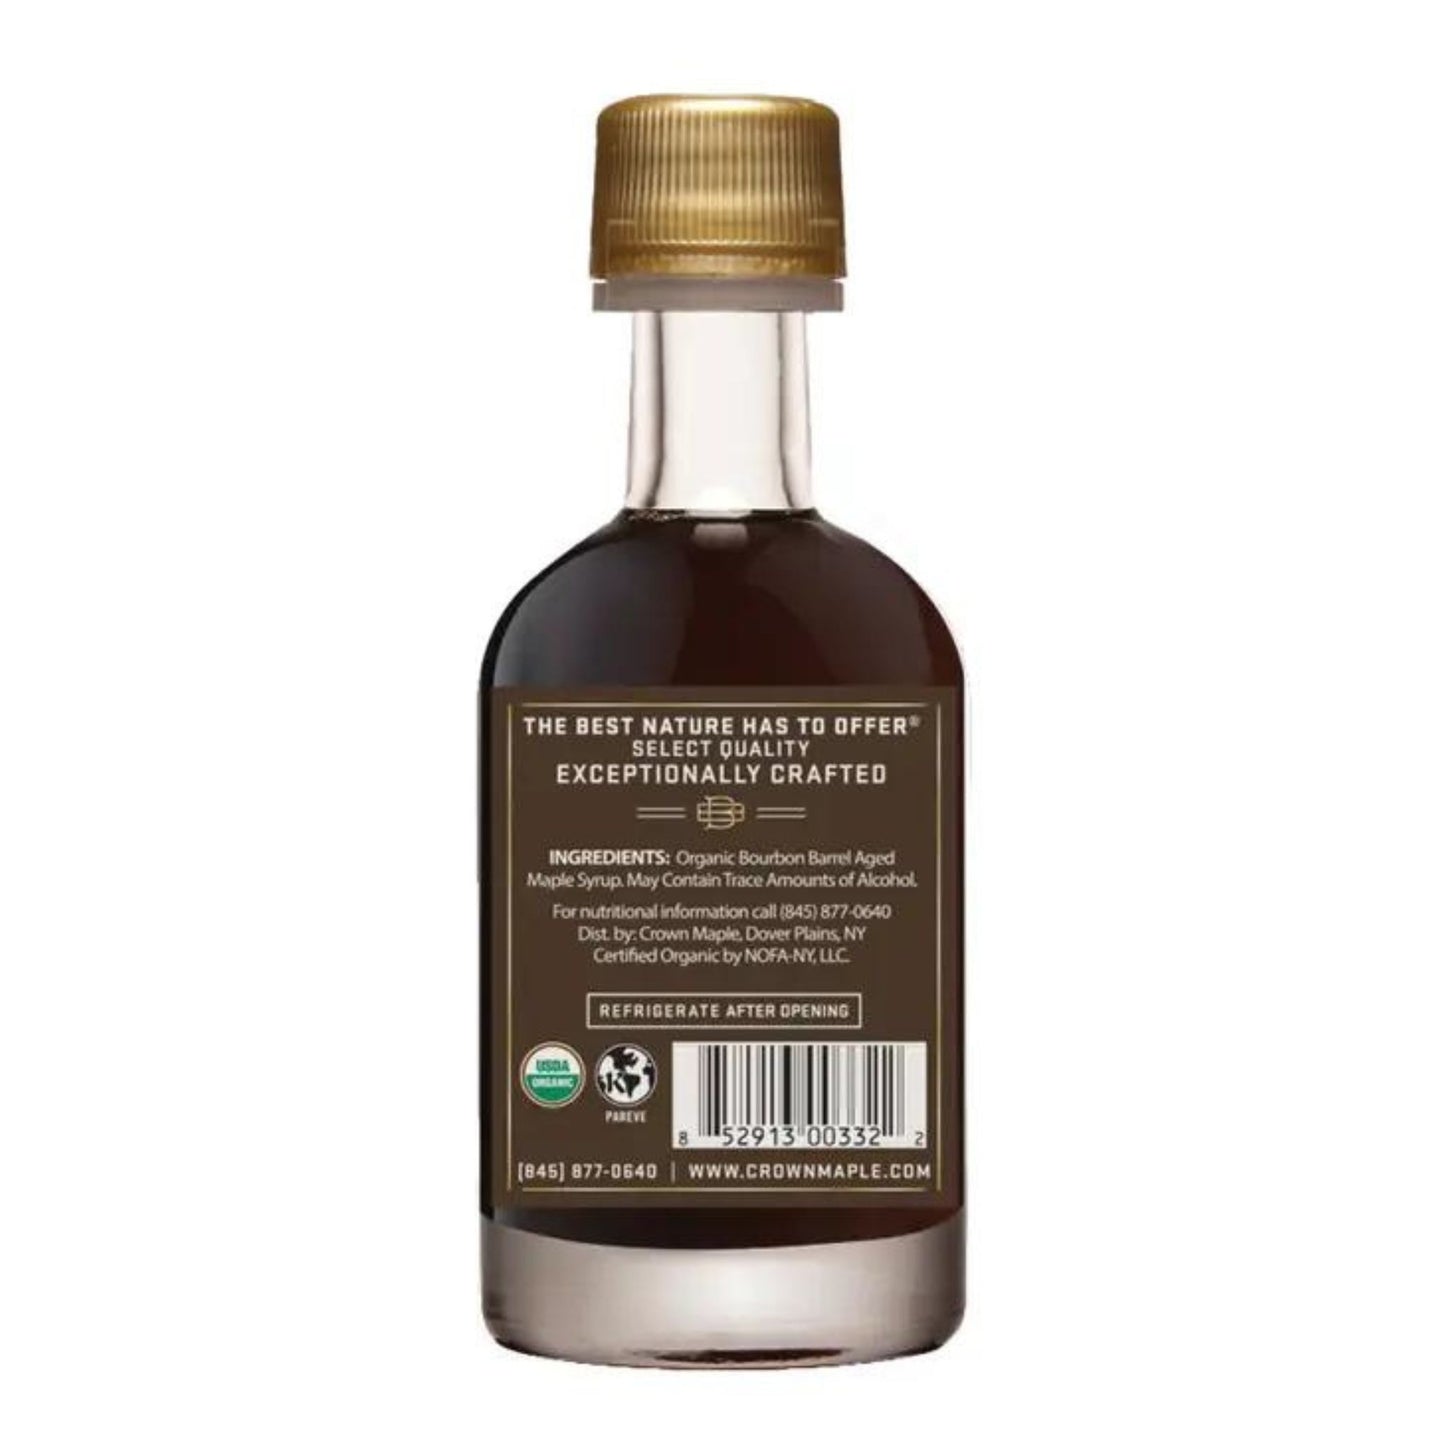 Bourbon Barrel Aged Organic Maple Syrup in a Glass Bottle. 1,7 Oz. Aromas of bourbon, smoky oak, graham cracker, brown butter & creamy vanilla. Back View of the Bottle